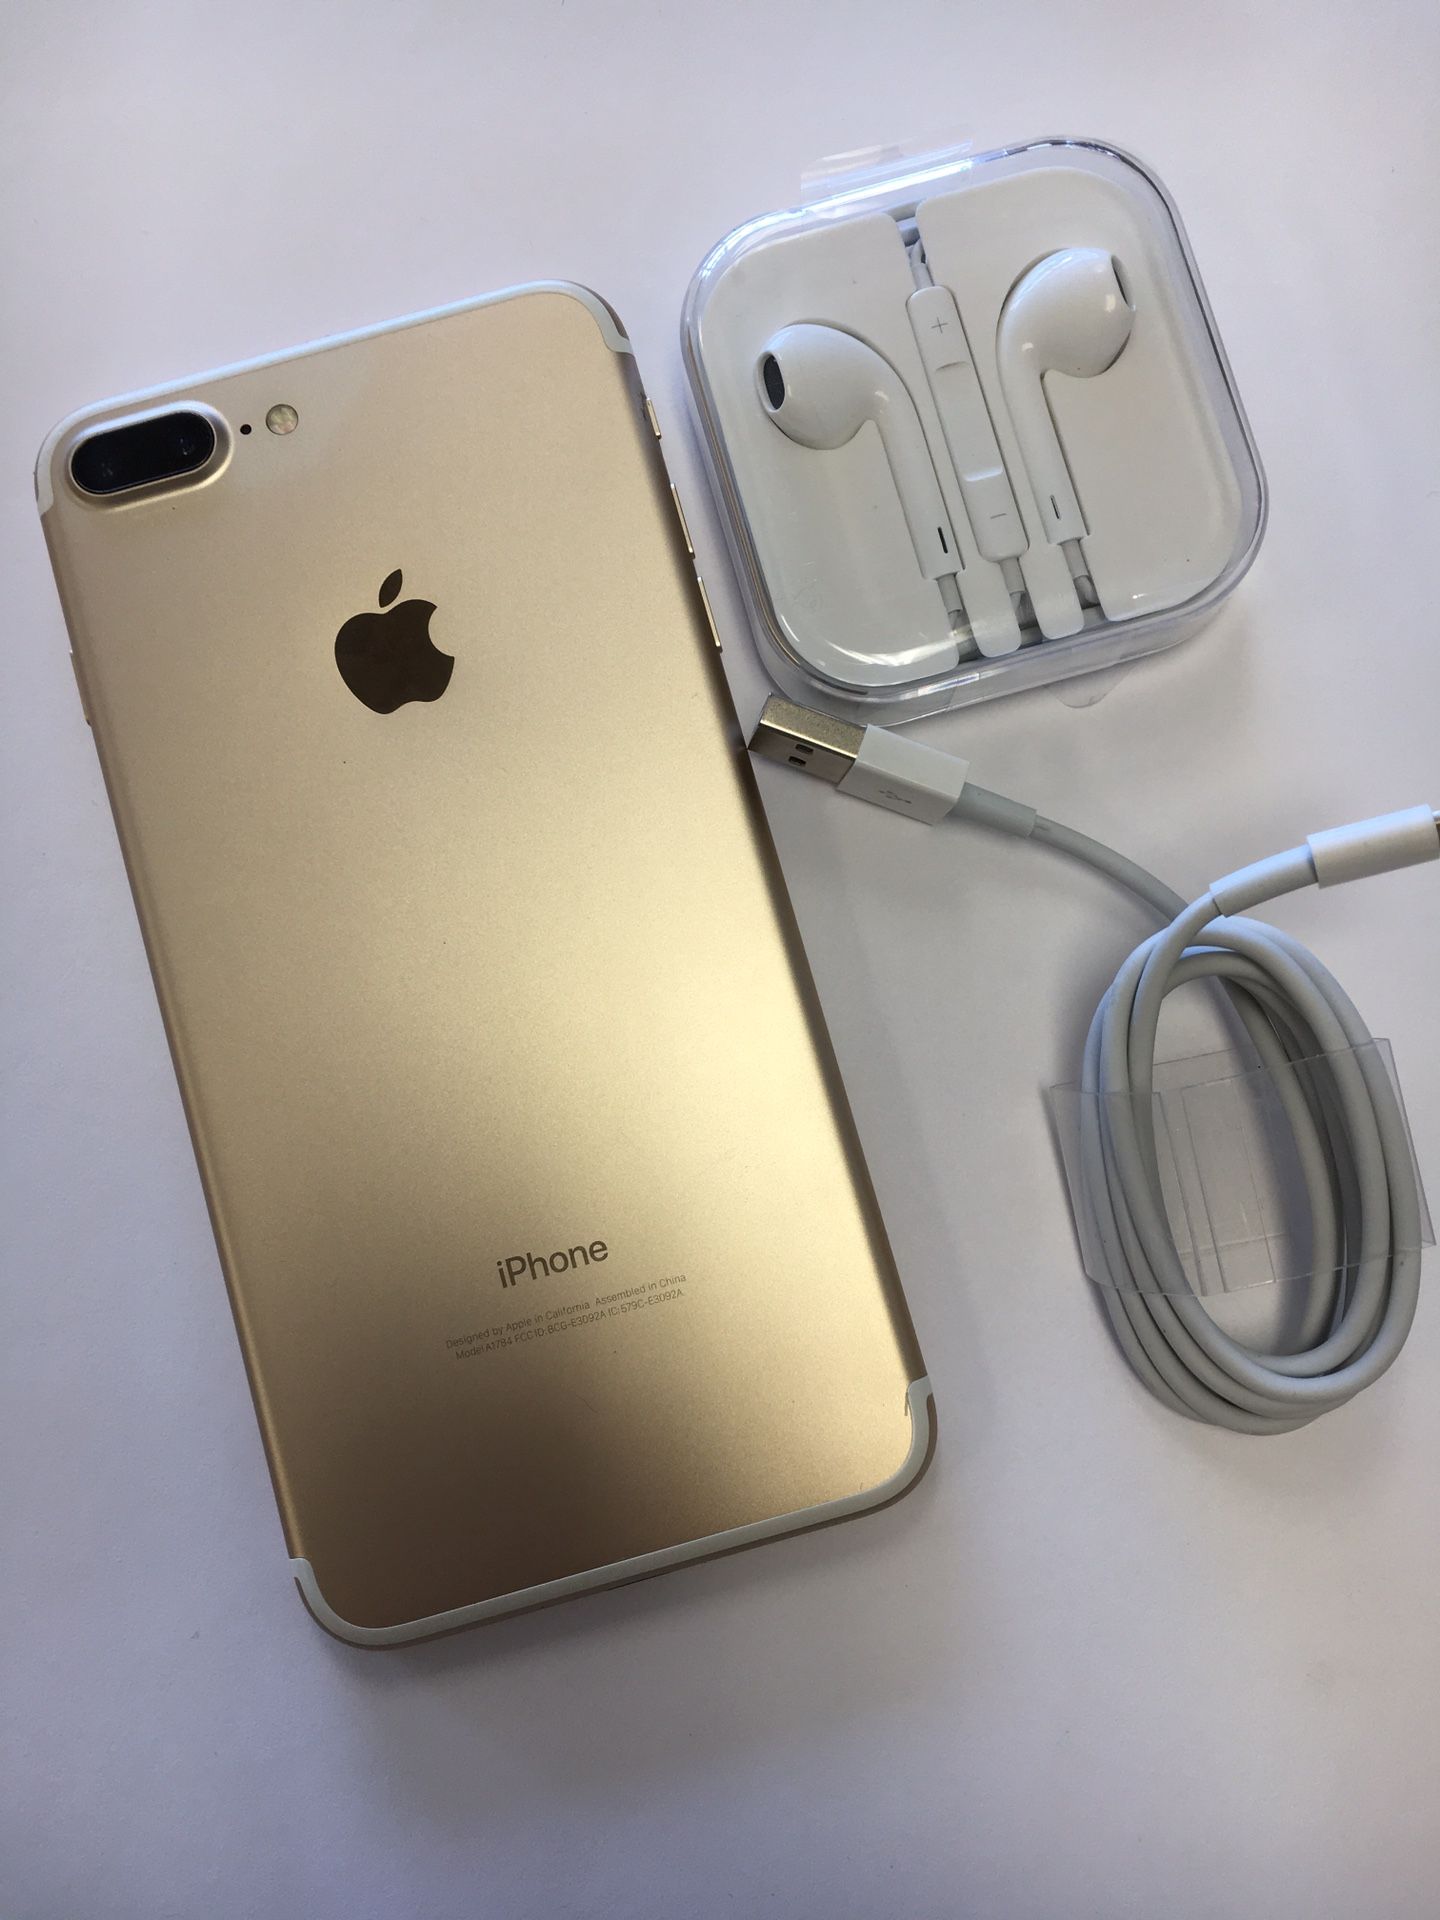 IPhone 7 Plus 128 GB excellent condition factory unlocked comes with charger headphone